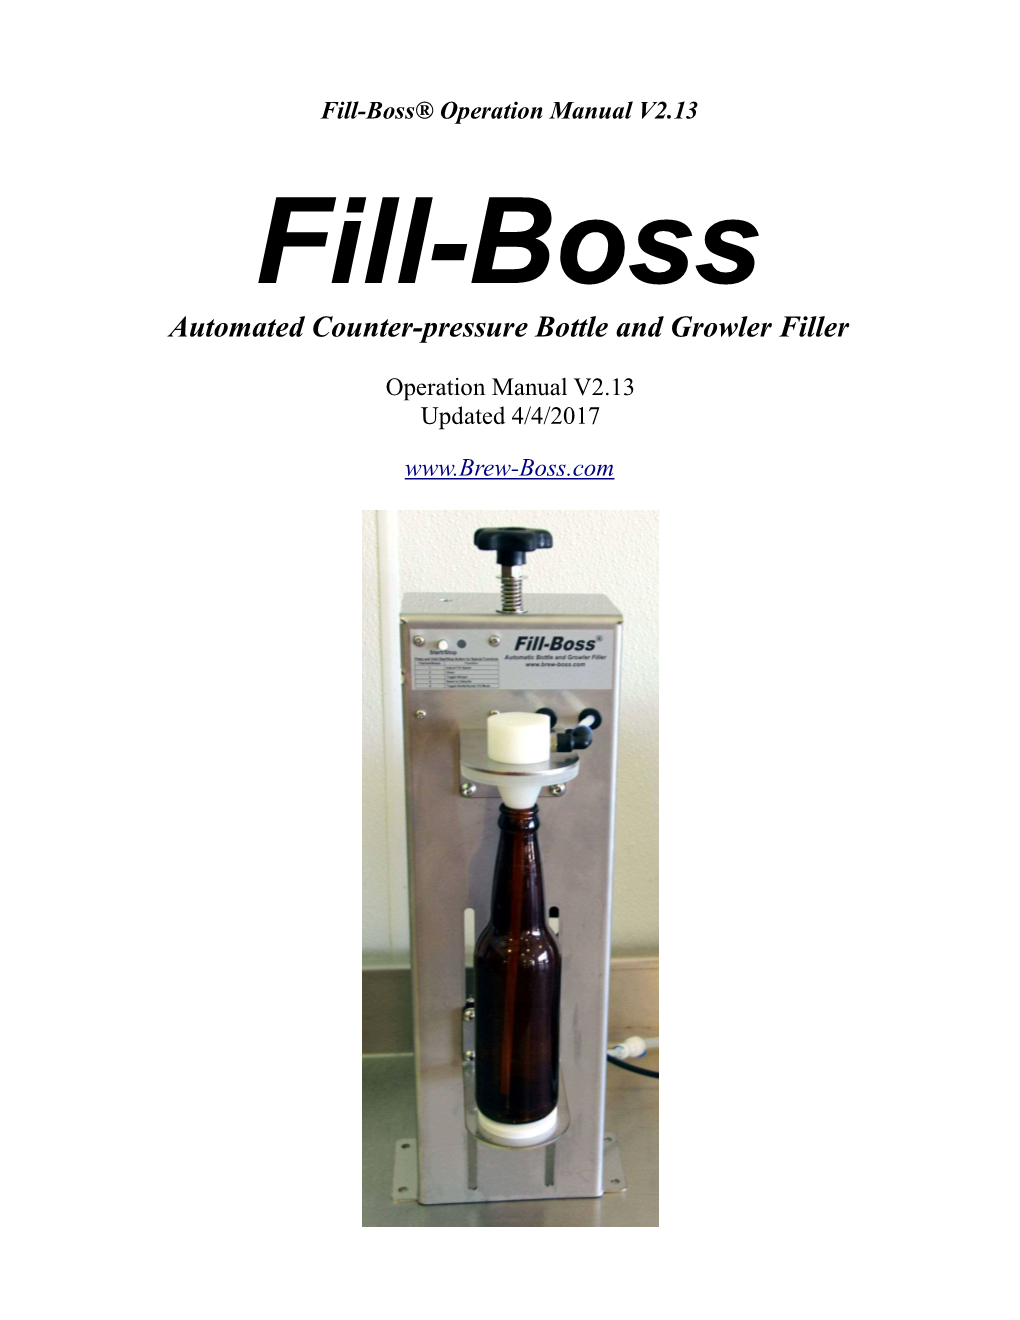 Automated Counter-Pressure Bottle and Growler Filler